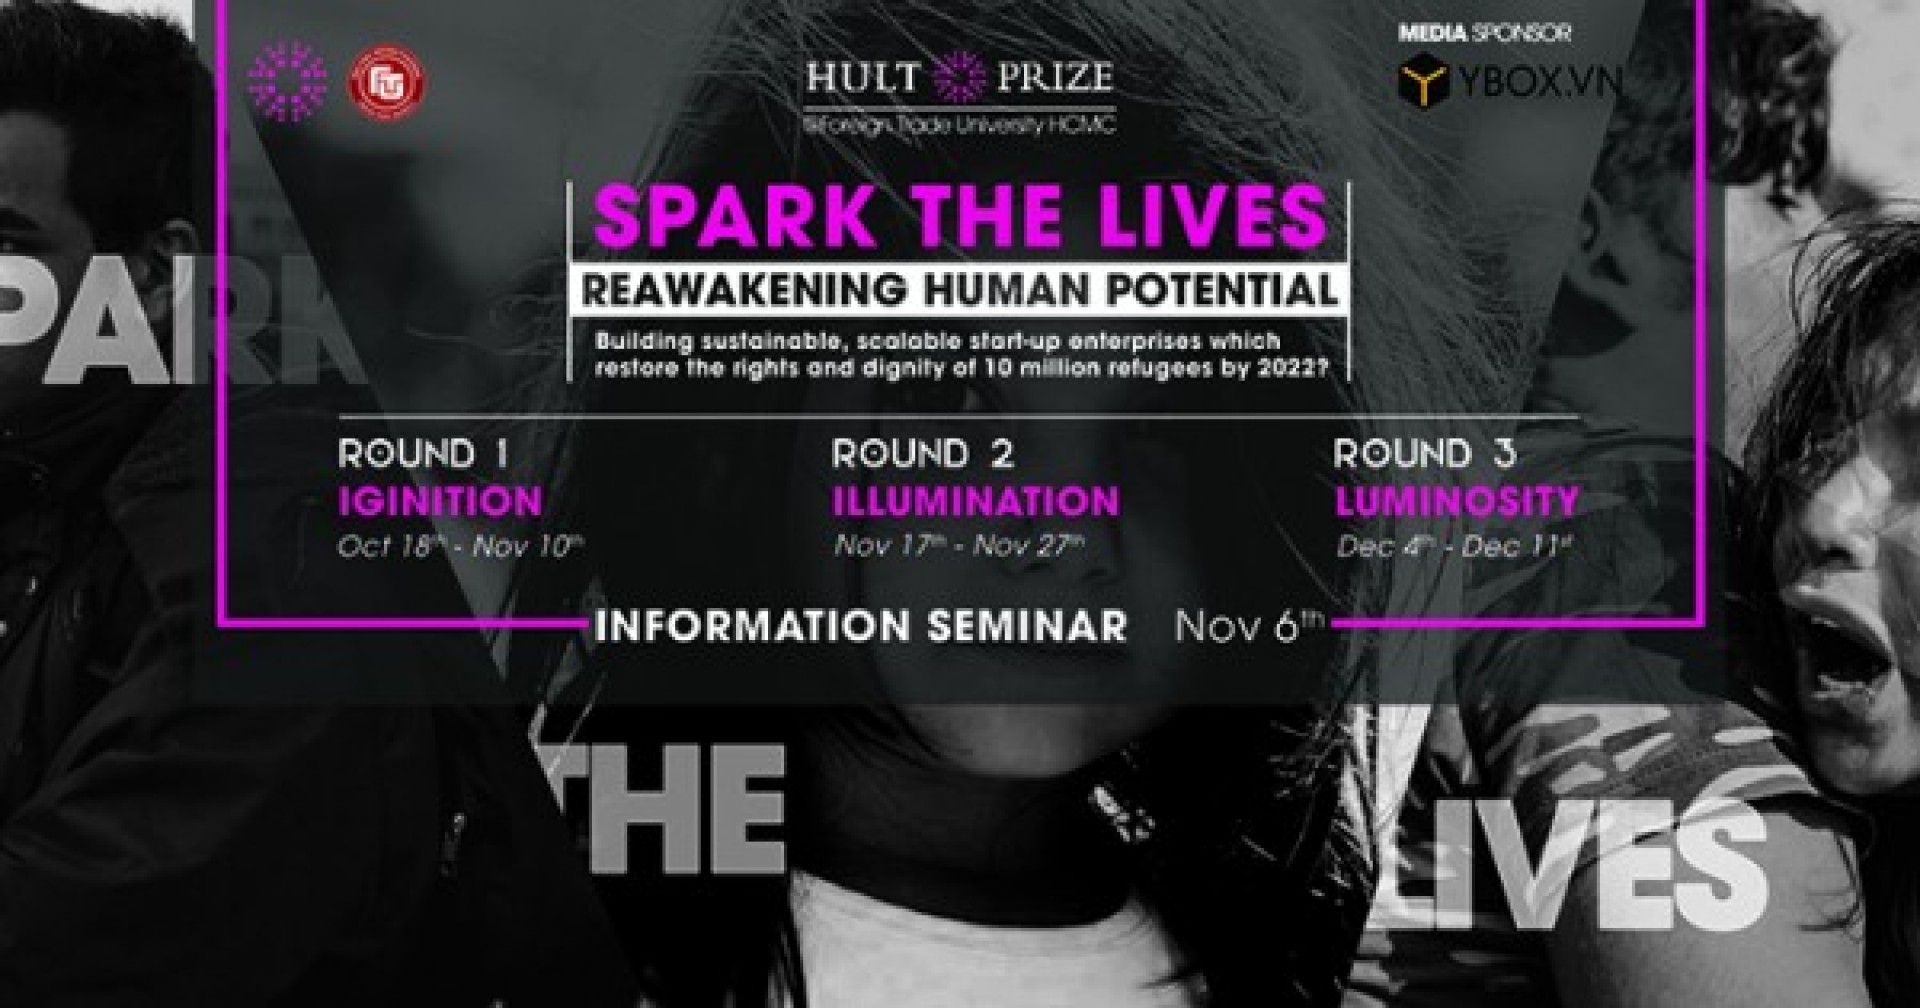 Welcome to Hult prize 2017 challenge released